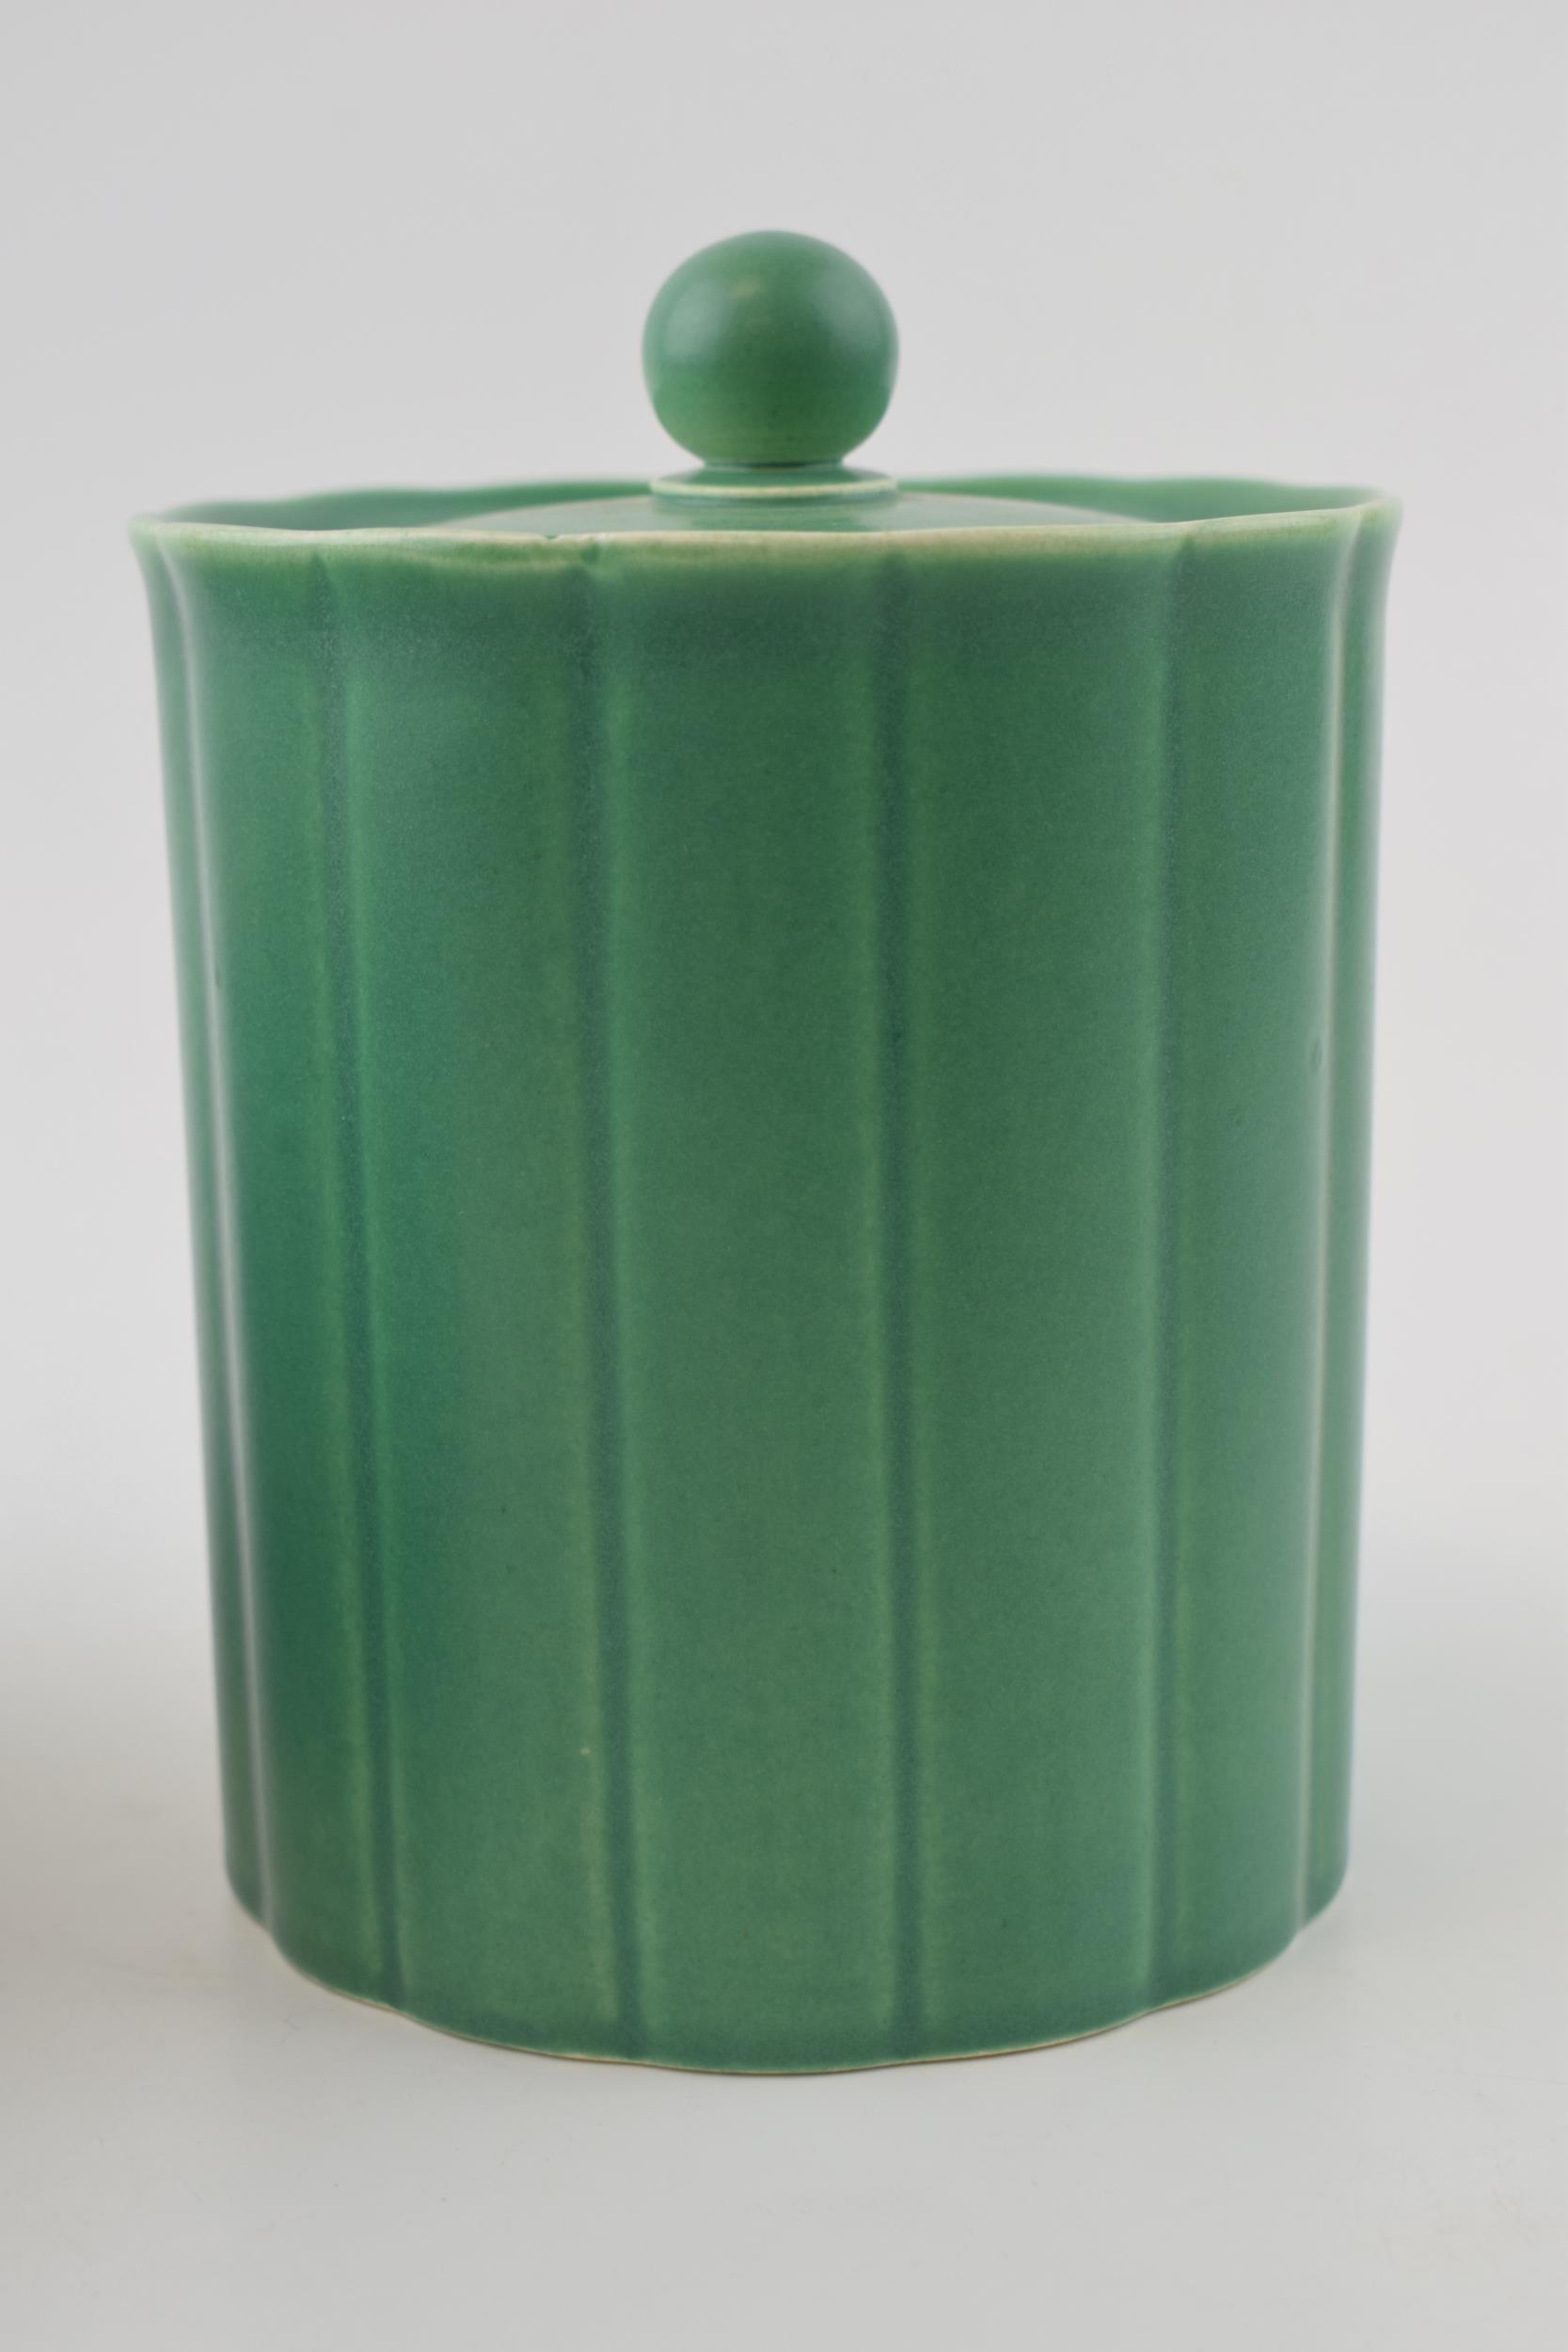 Wedgwood Keith Murray biscuit barrel / lidded jar in green. Height 15cm. In good condition with no